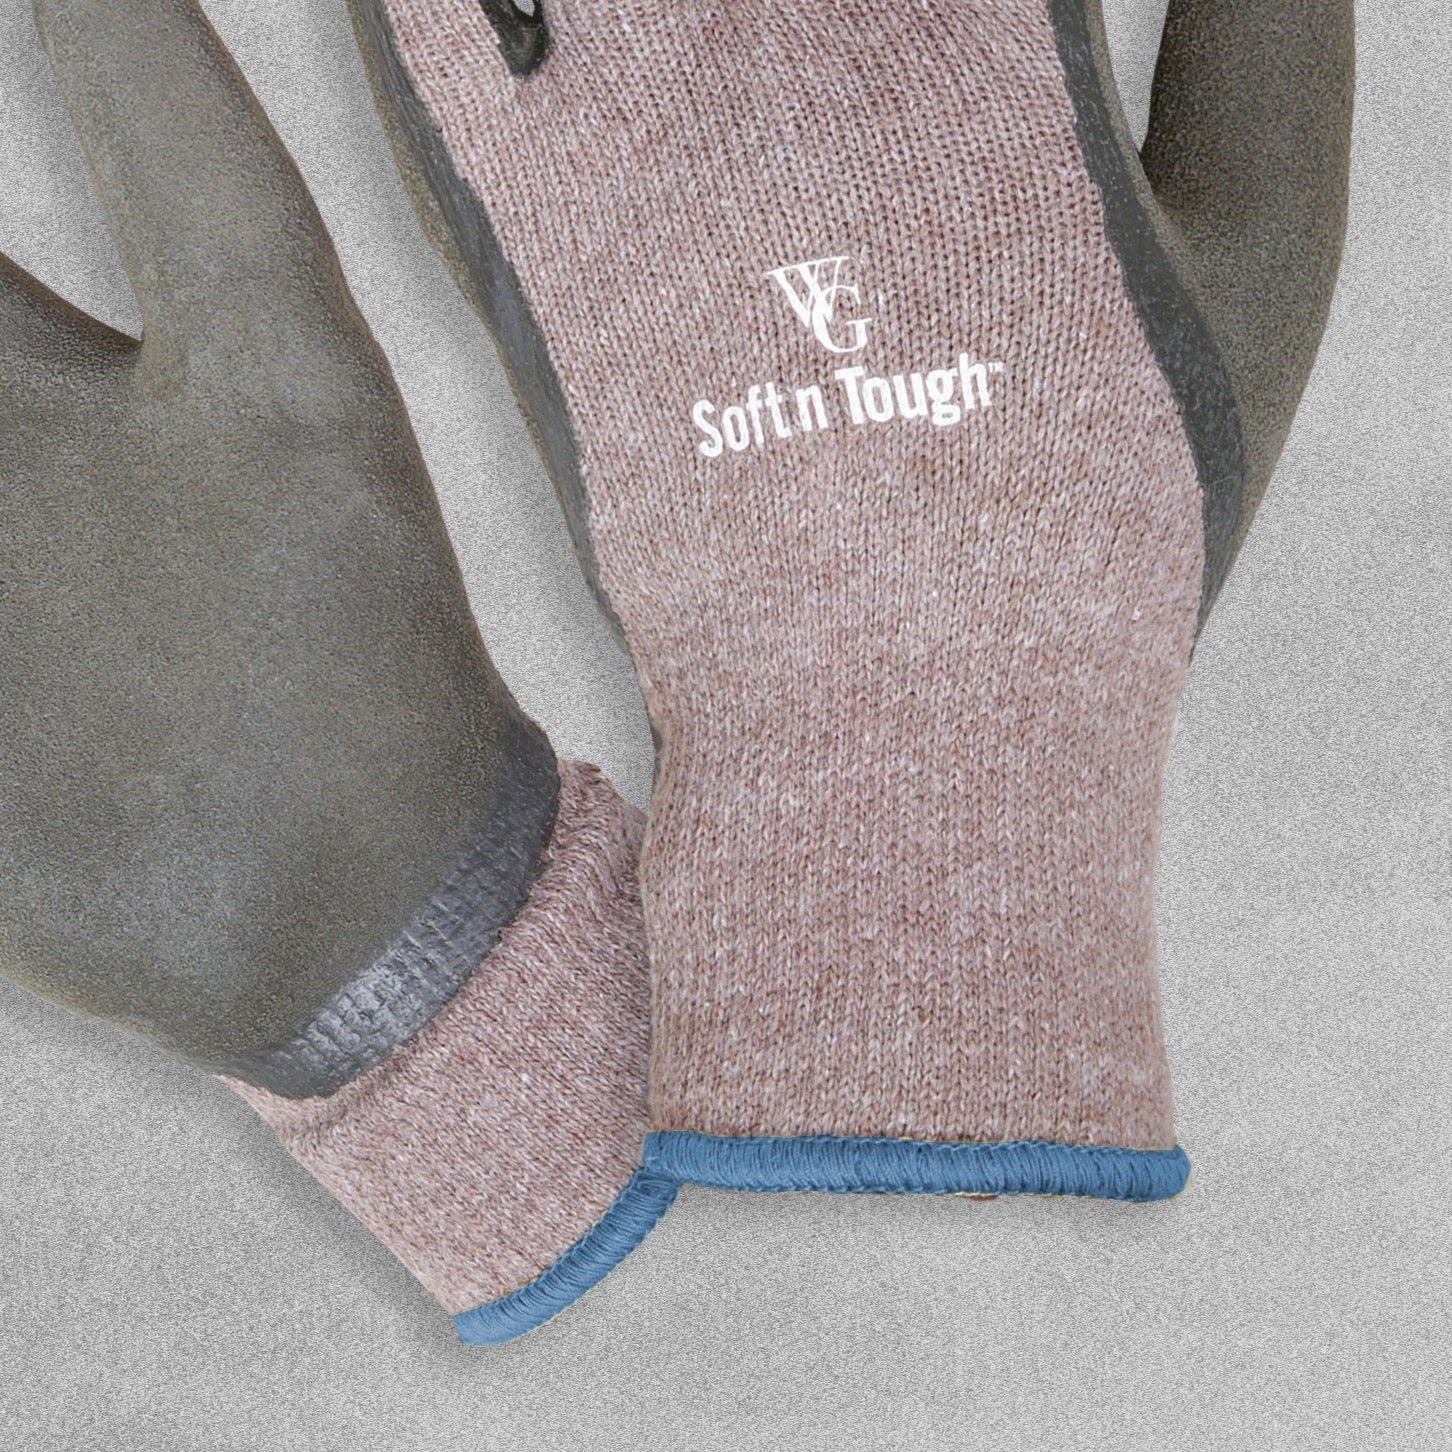 WithGarden Soft and Tough Thermal Gardening Gloves - Brown